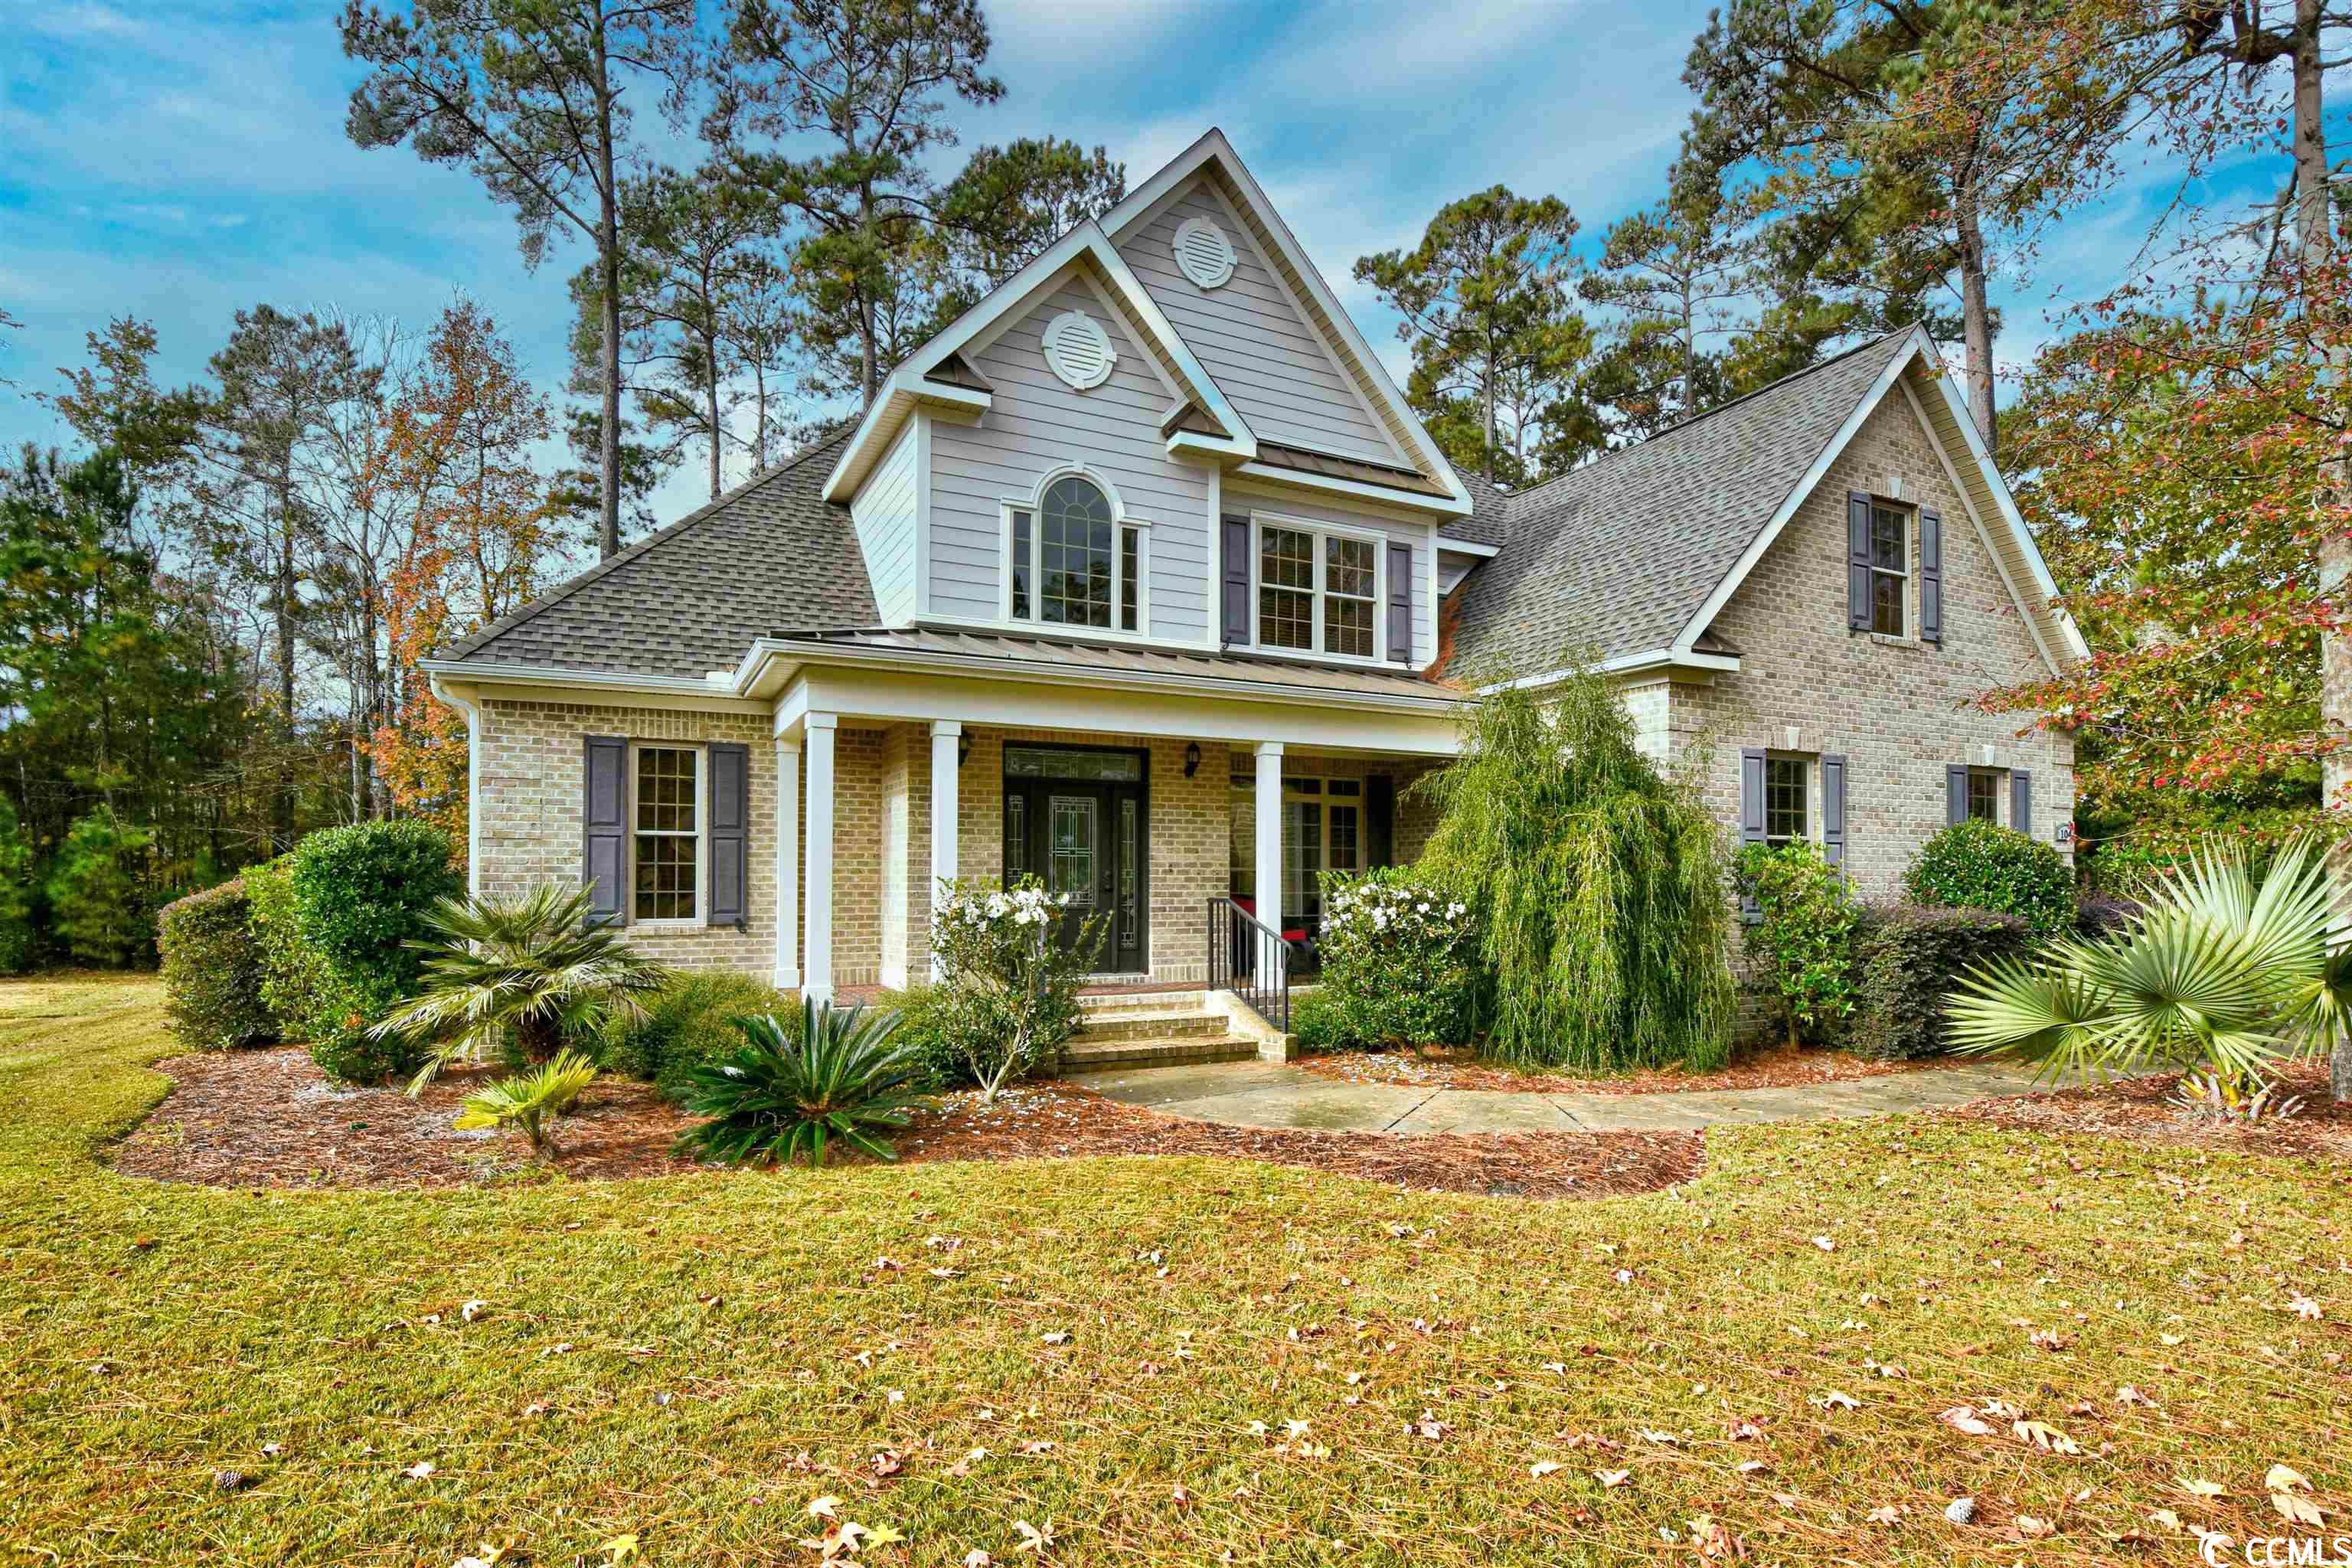 27b Murrells Inlet Horry County Real Estate Listings Main Image